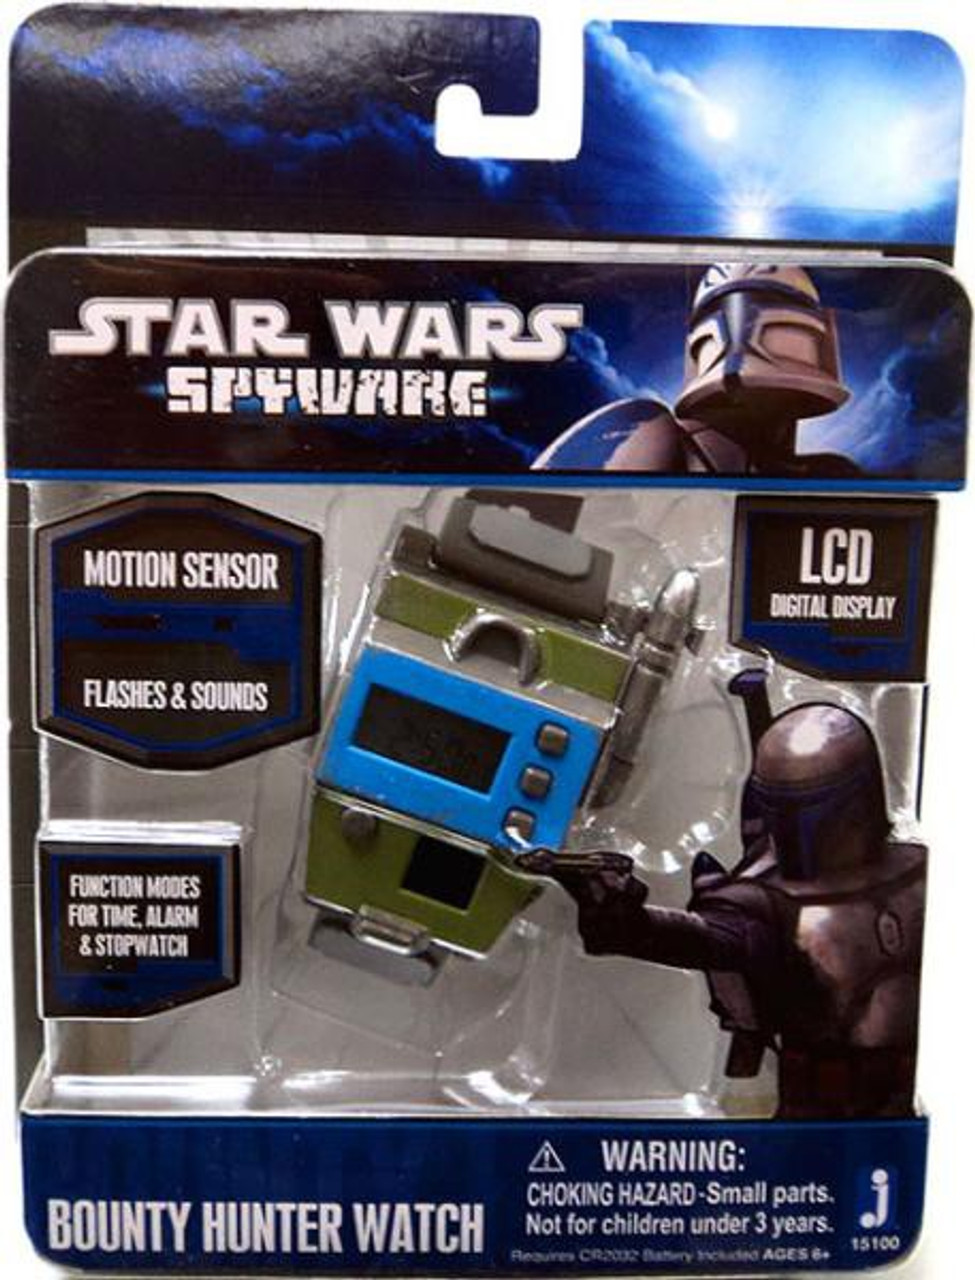 Star Wars Spyware Bounty Hunter Watch Roleplay Toy Damaged Package - roblox awesome star wars map star wars first order rp